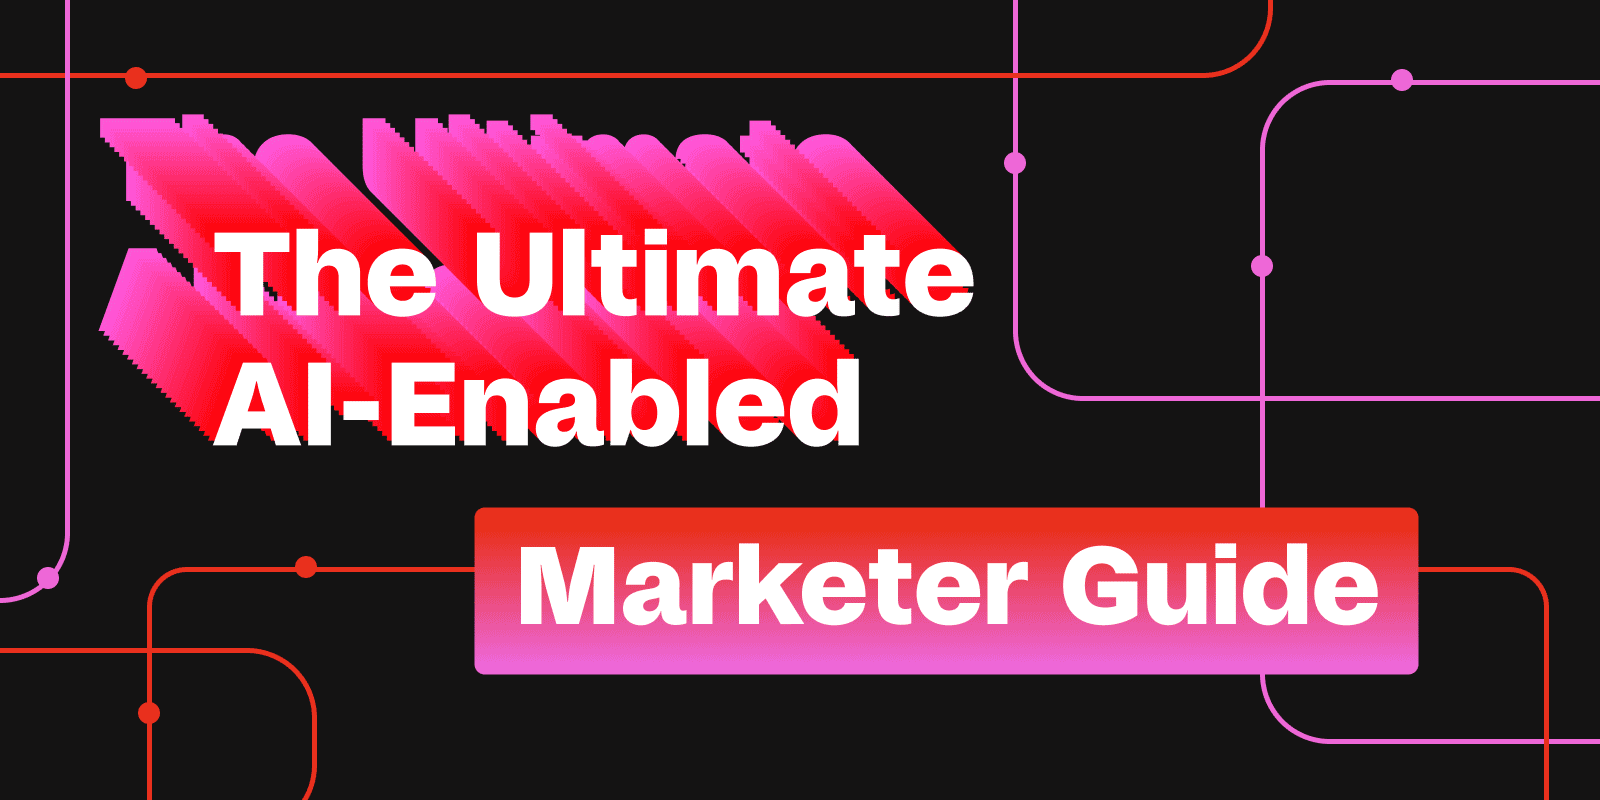 The Ultimate AI-Enabled Marketer Guide